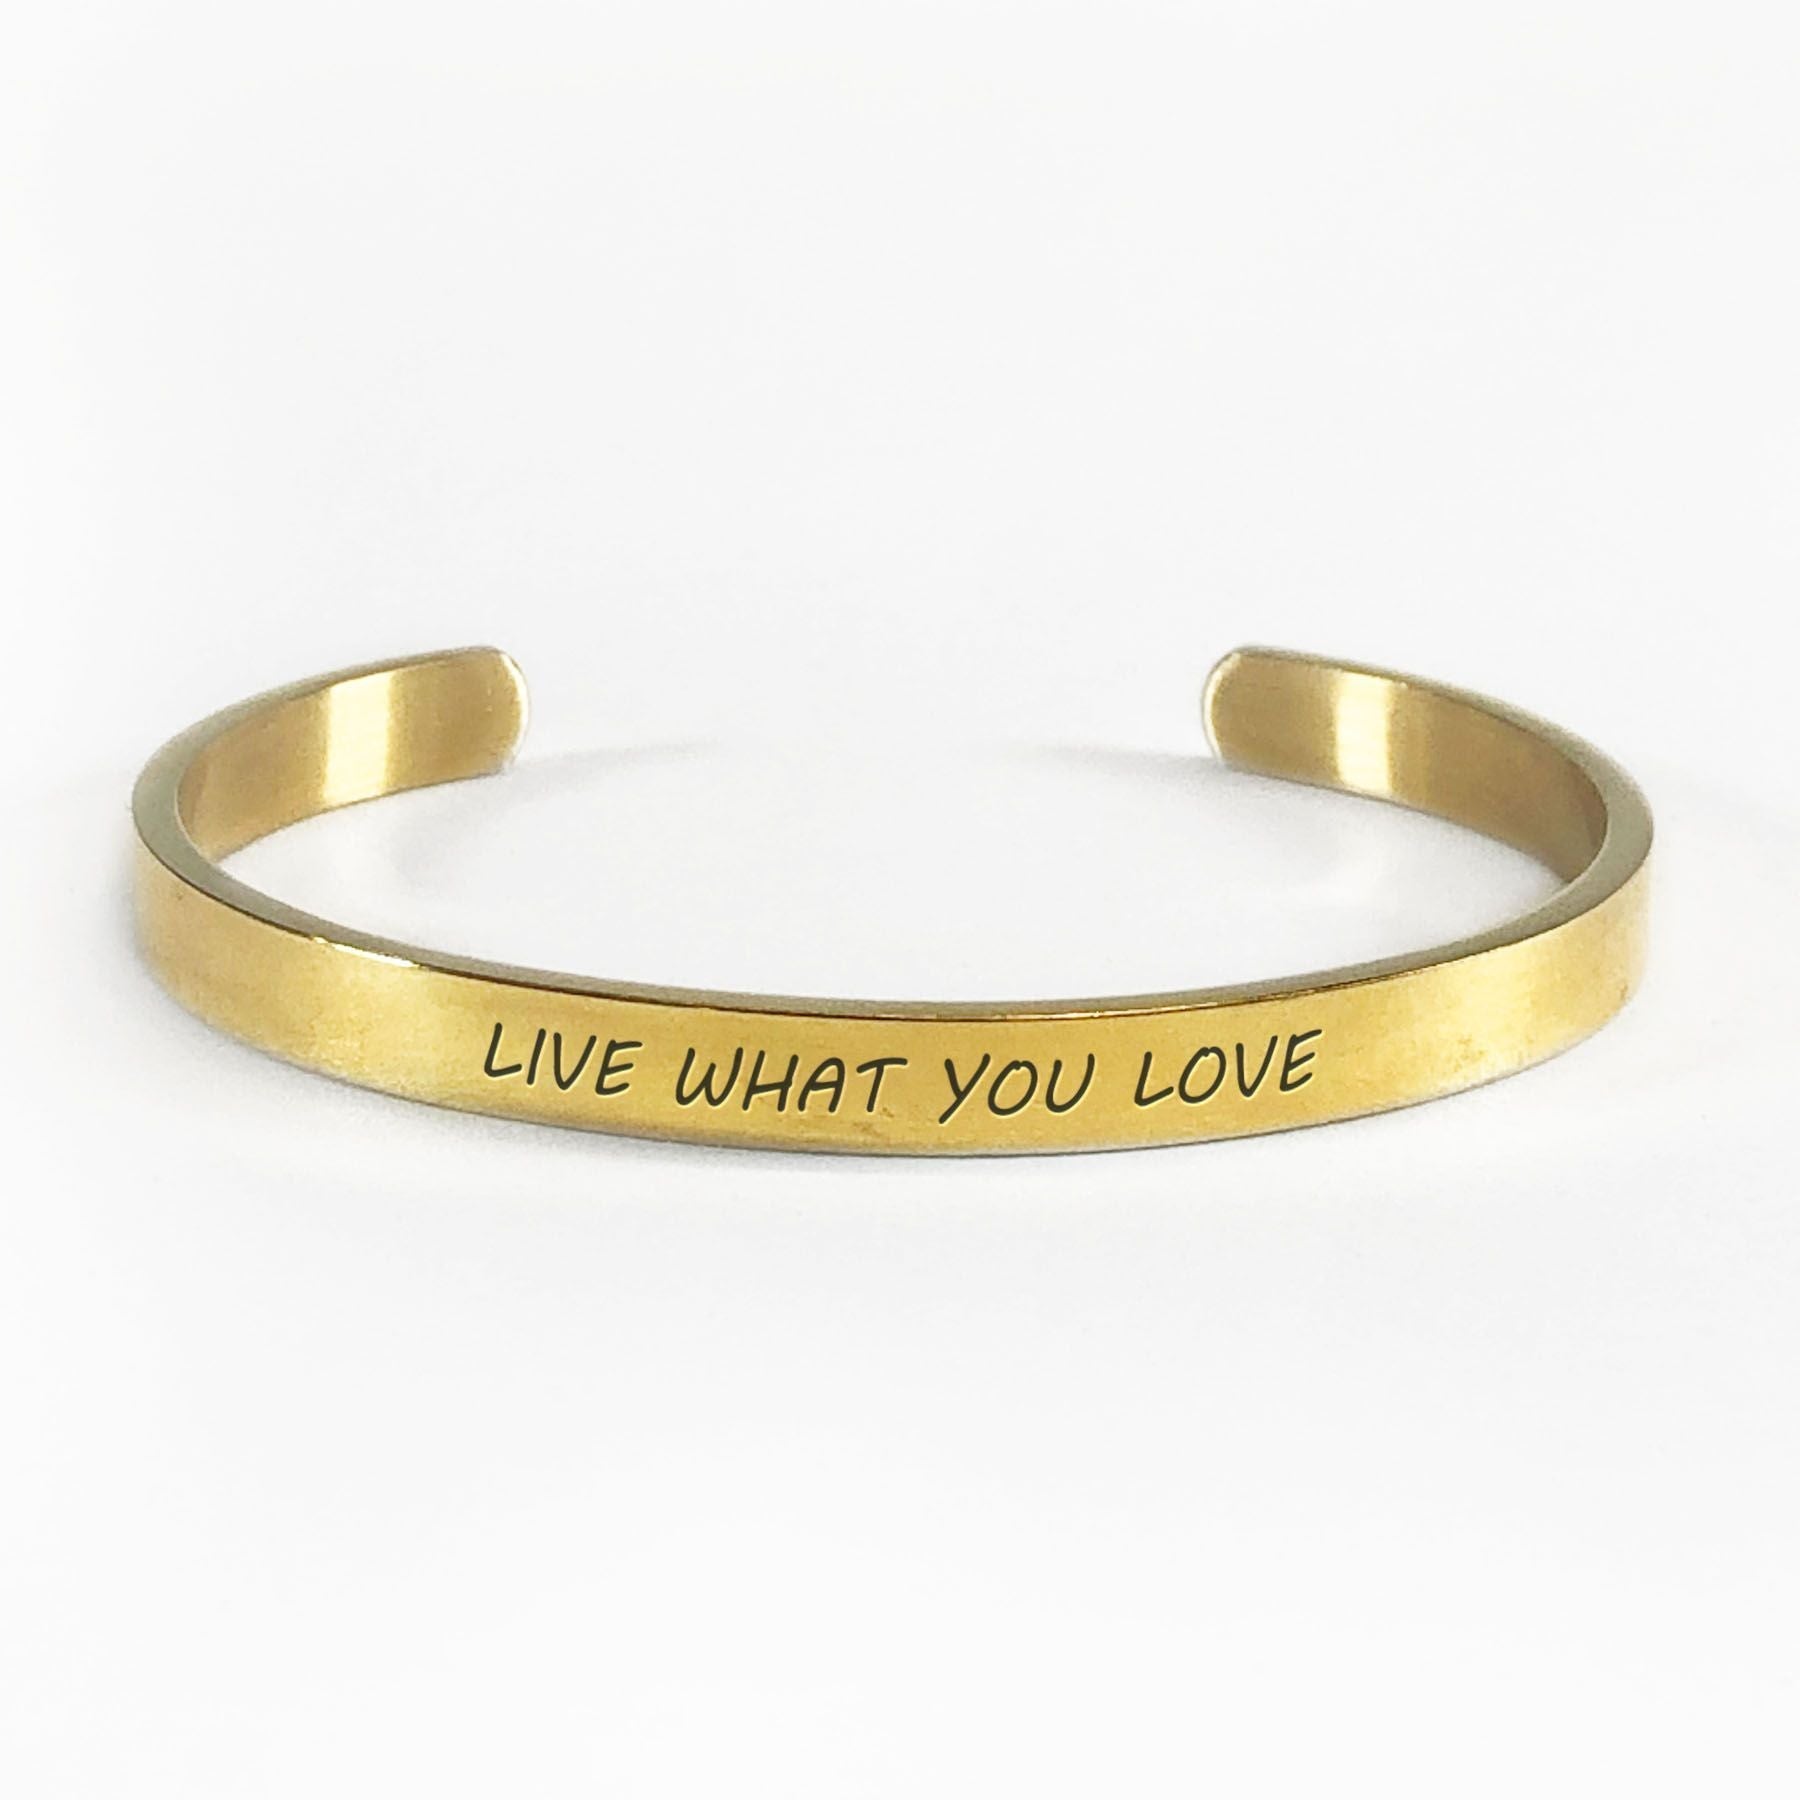 Live what you love bracelet with gold plating